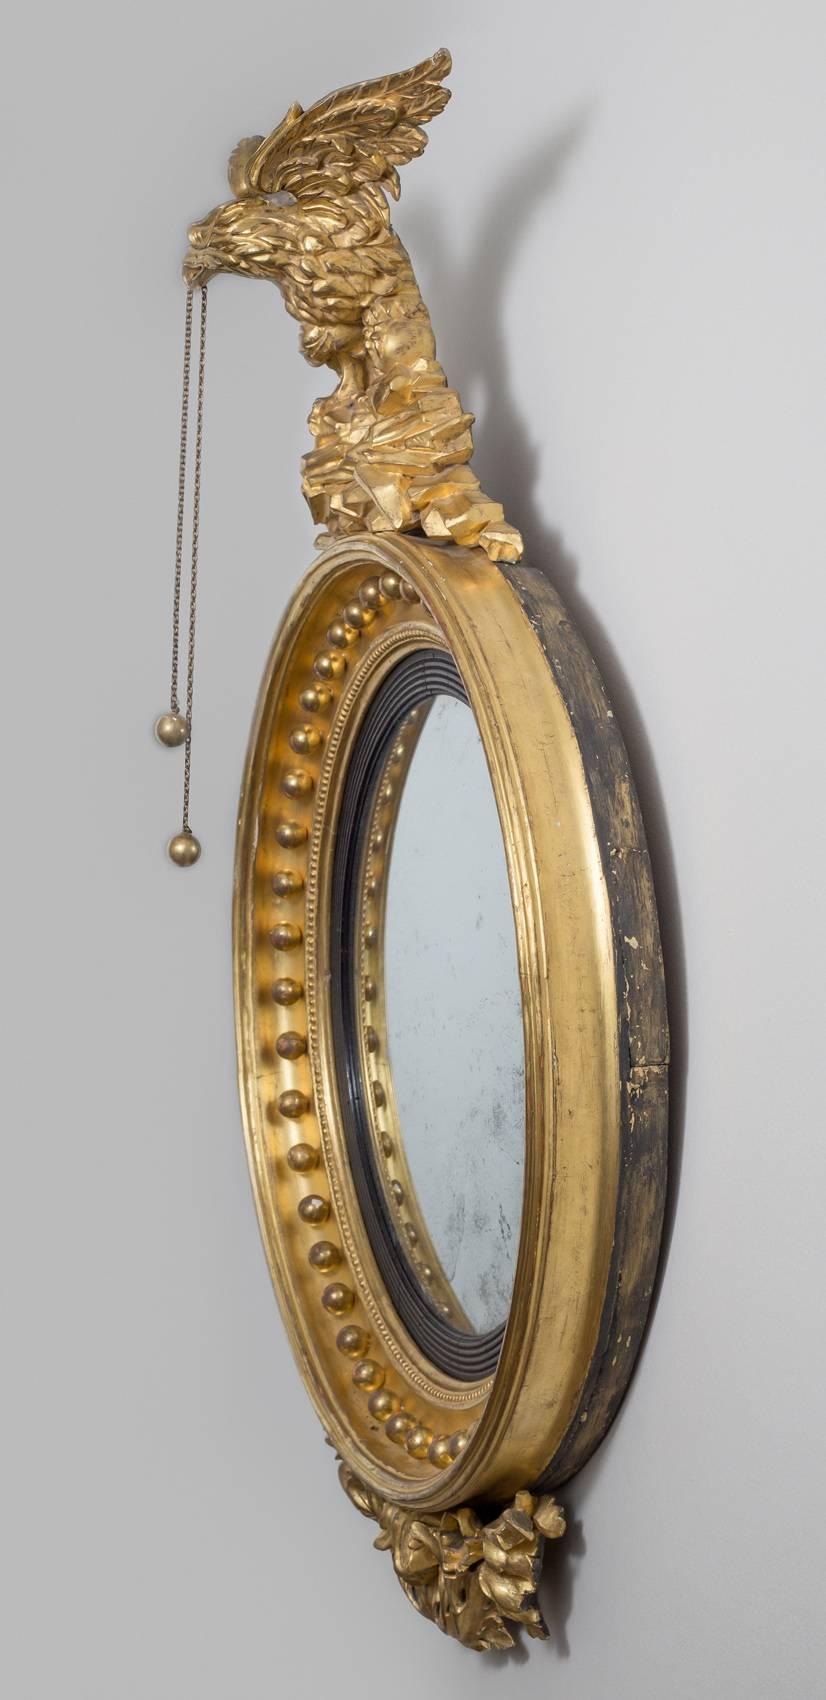 Regency giltwood convex wall mirror, the circular original mercury plate and ebonized reeded slip set within a molded concave frame with ball spacers, surmounted by a spread winged eagle with balls and chains hanging from its beak, perched on a